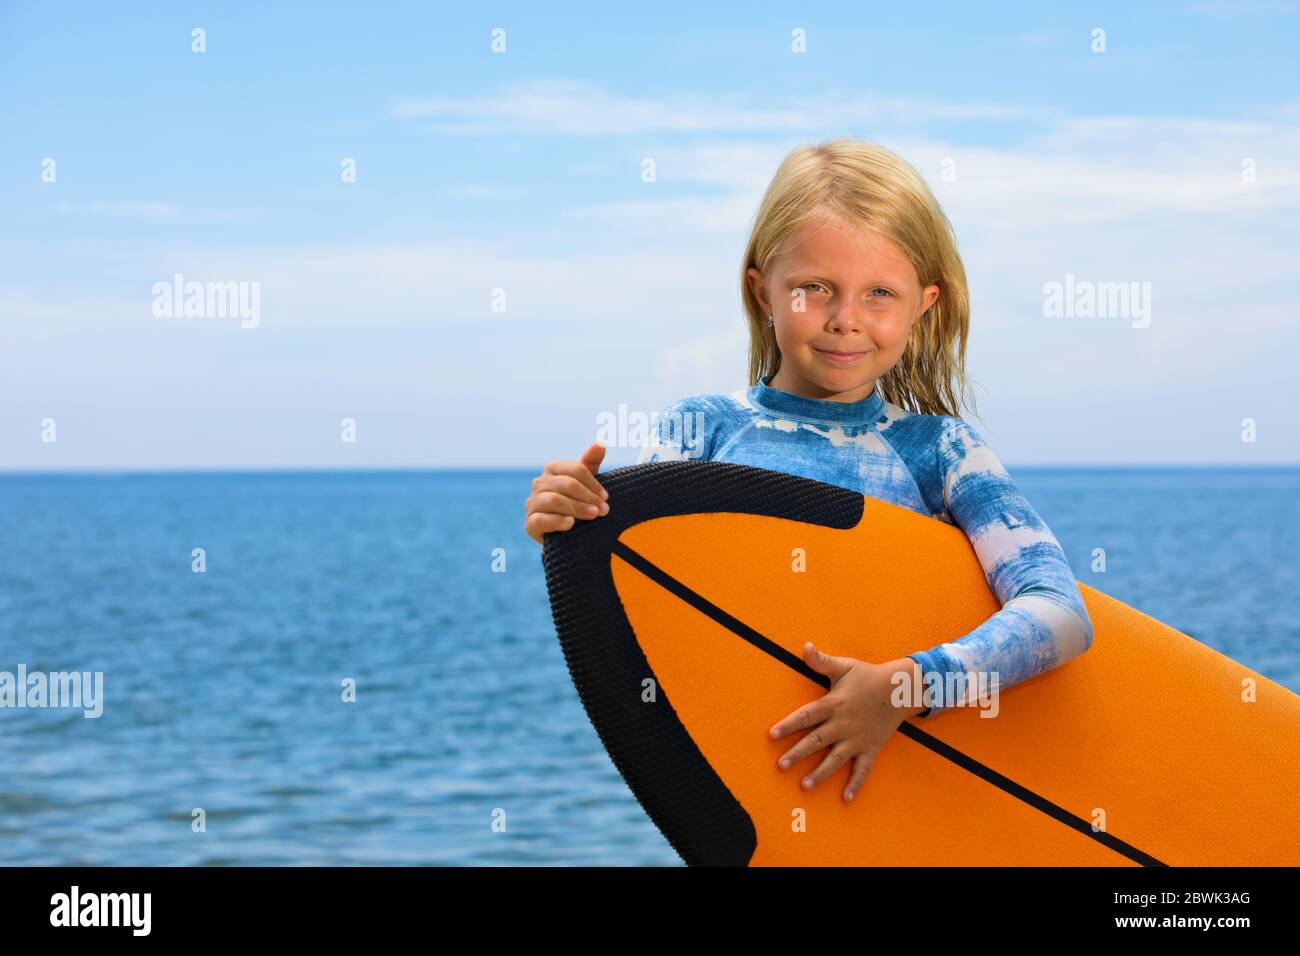 Happy baby girl - young surfer learn to ride on surfboard with fun on sea waves. Active family lifestyle, kids outdoor water sport lessons, Stock Photo